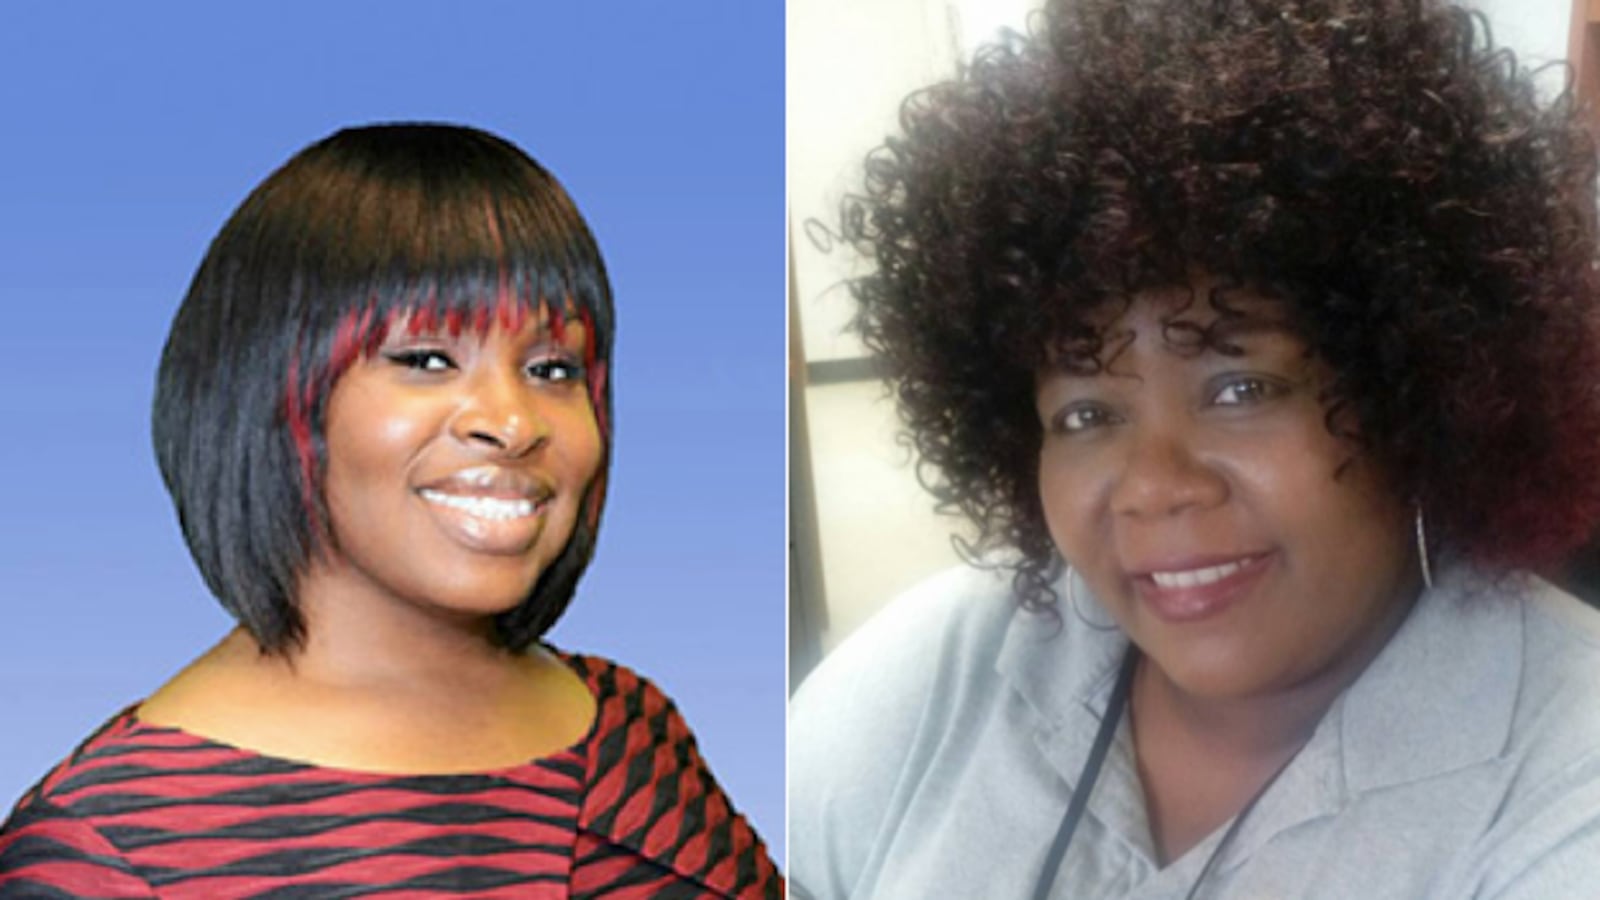 From left: Incumbent Stephanie Love and challenger Sharon Fields are seeking the District 3 seat for the Shelby County Schools Board of Education.